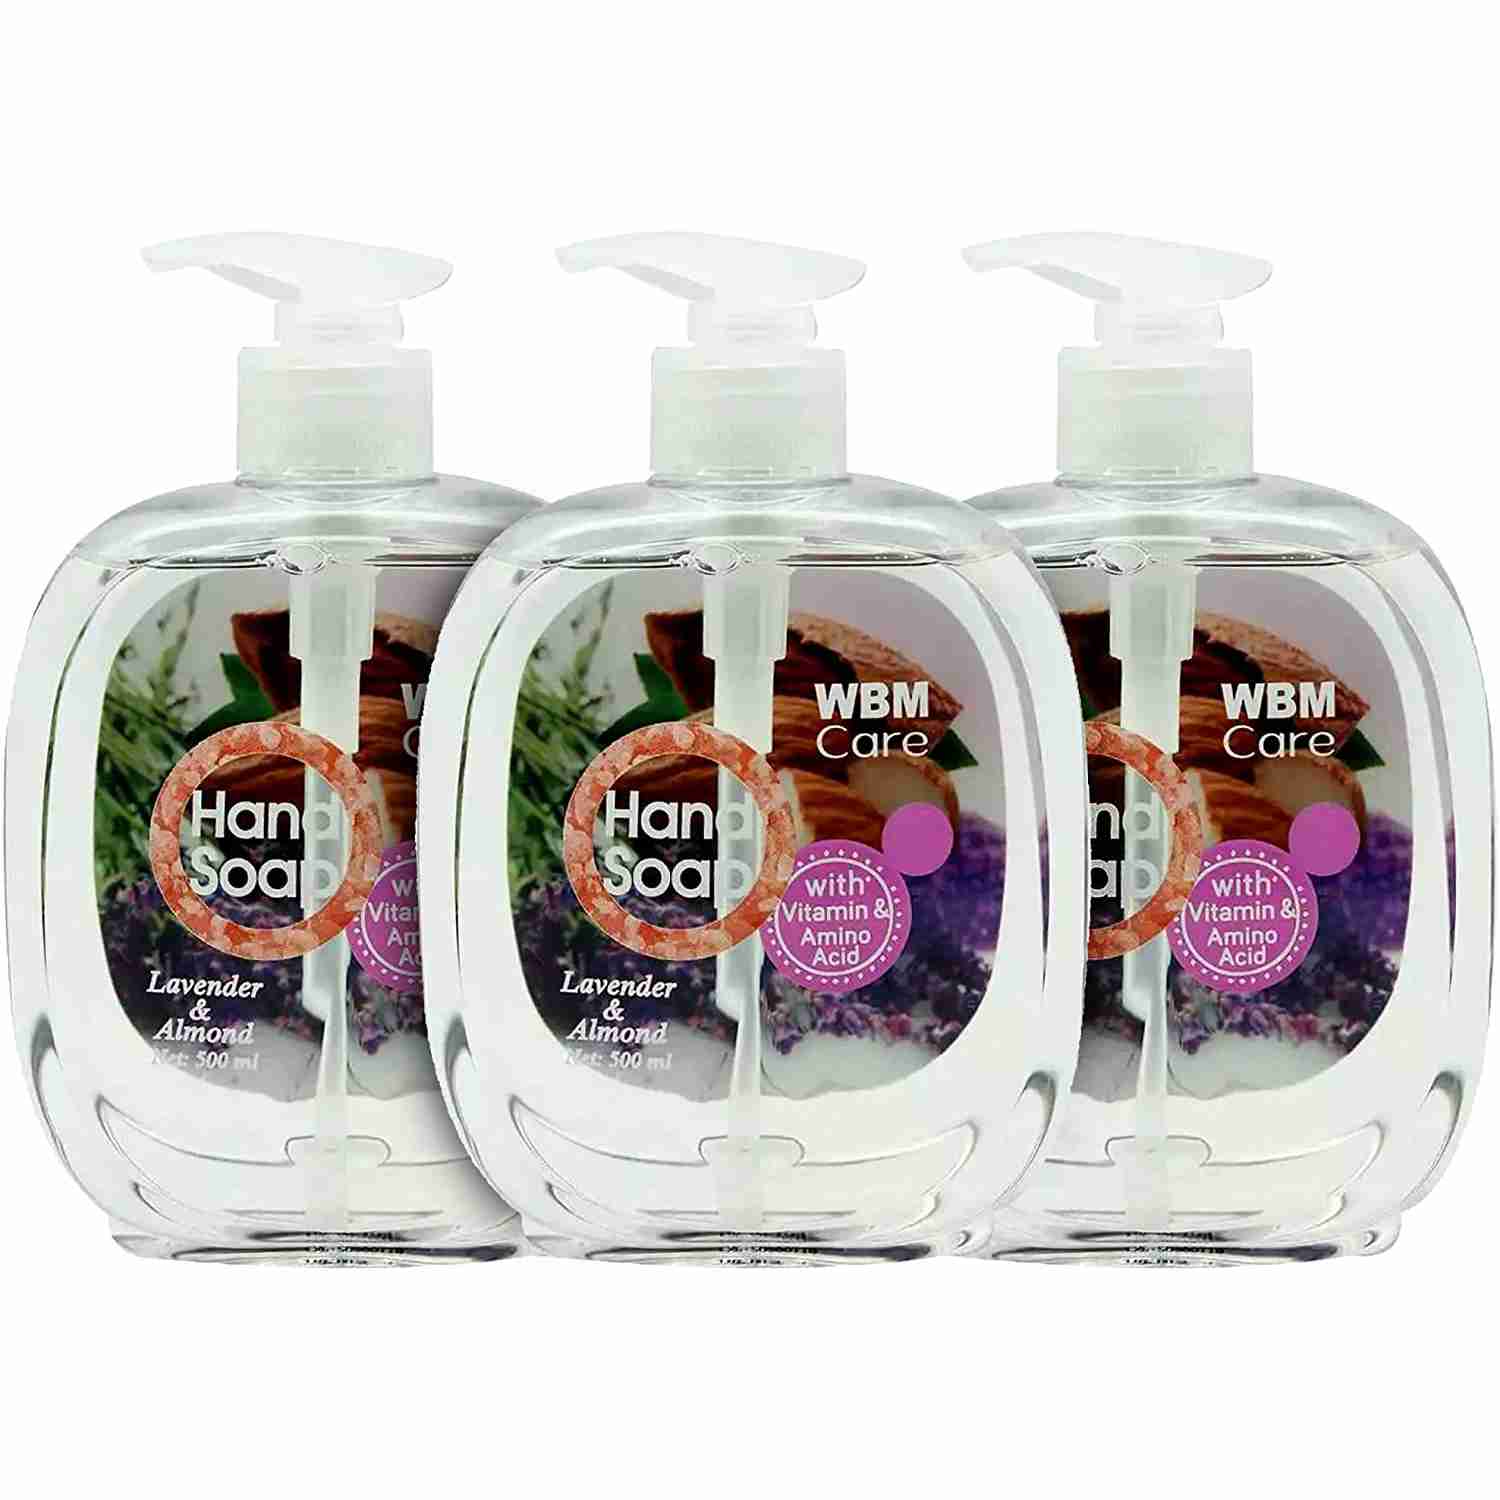 hand-soap with cash back rebate